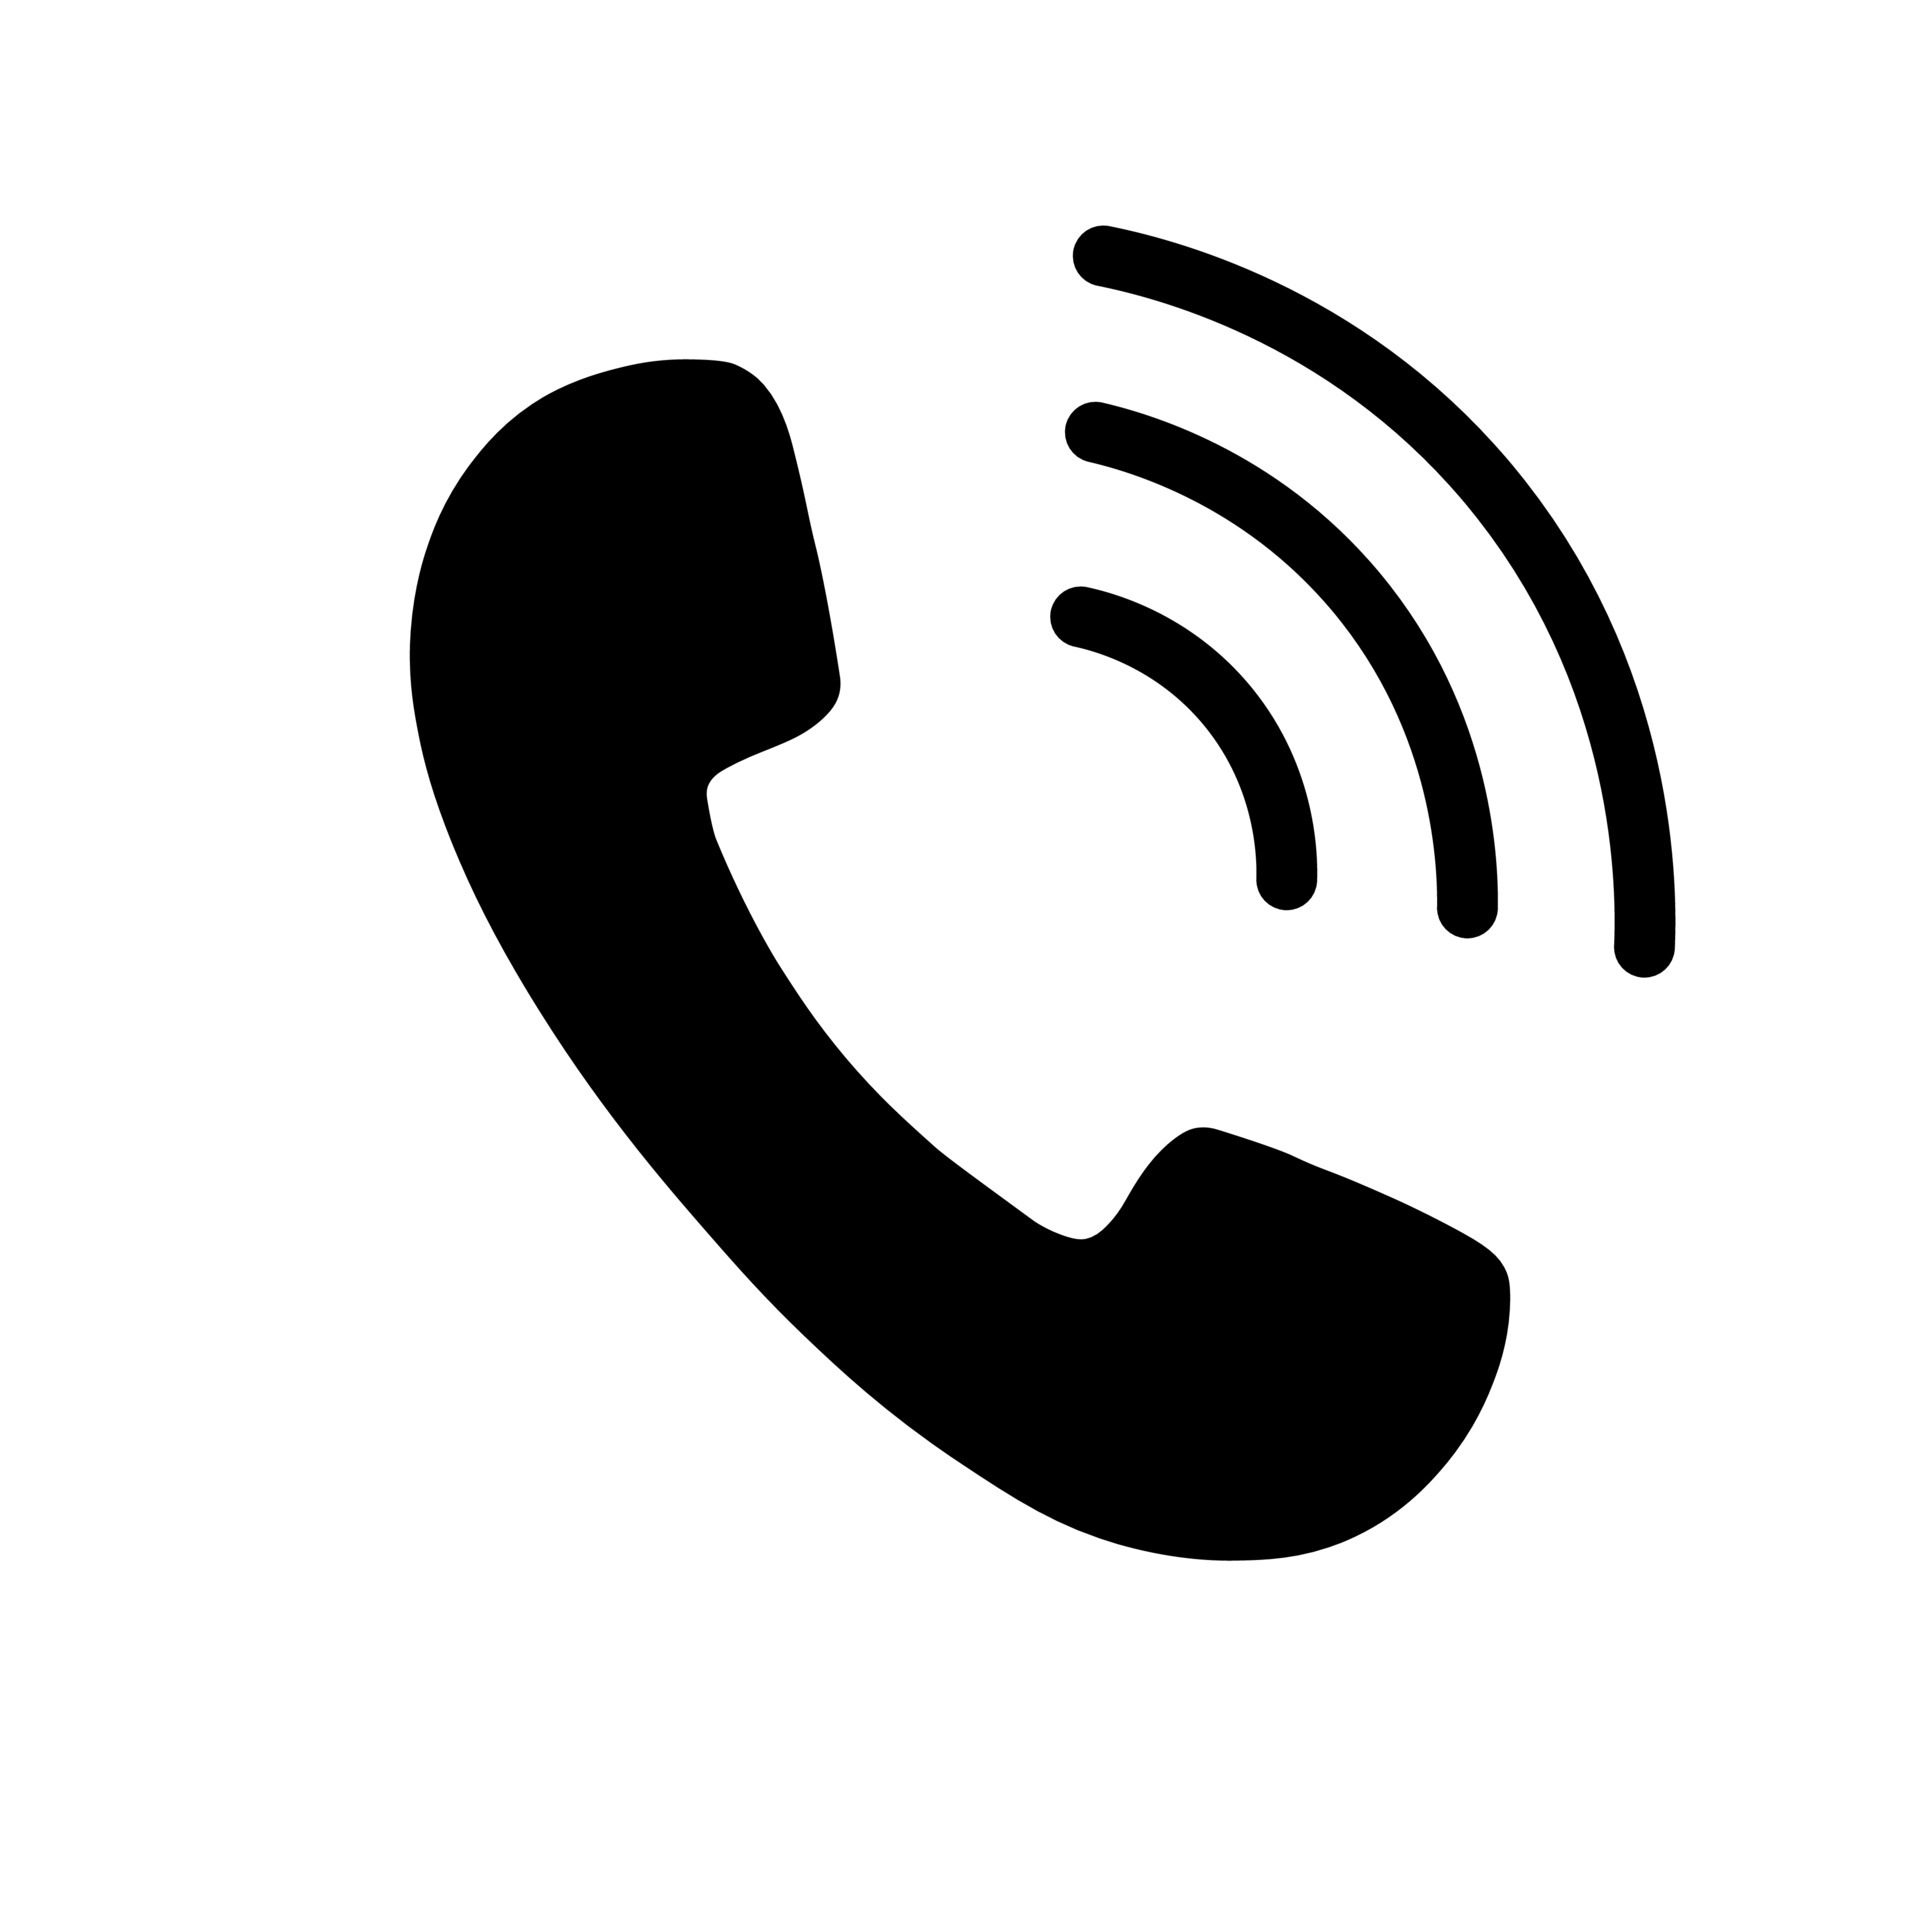 phone-icon-telephone-icon-symbol-for-app-and-messenger-vector